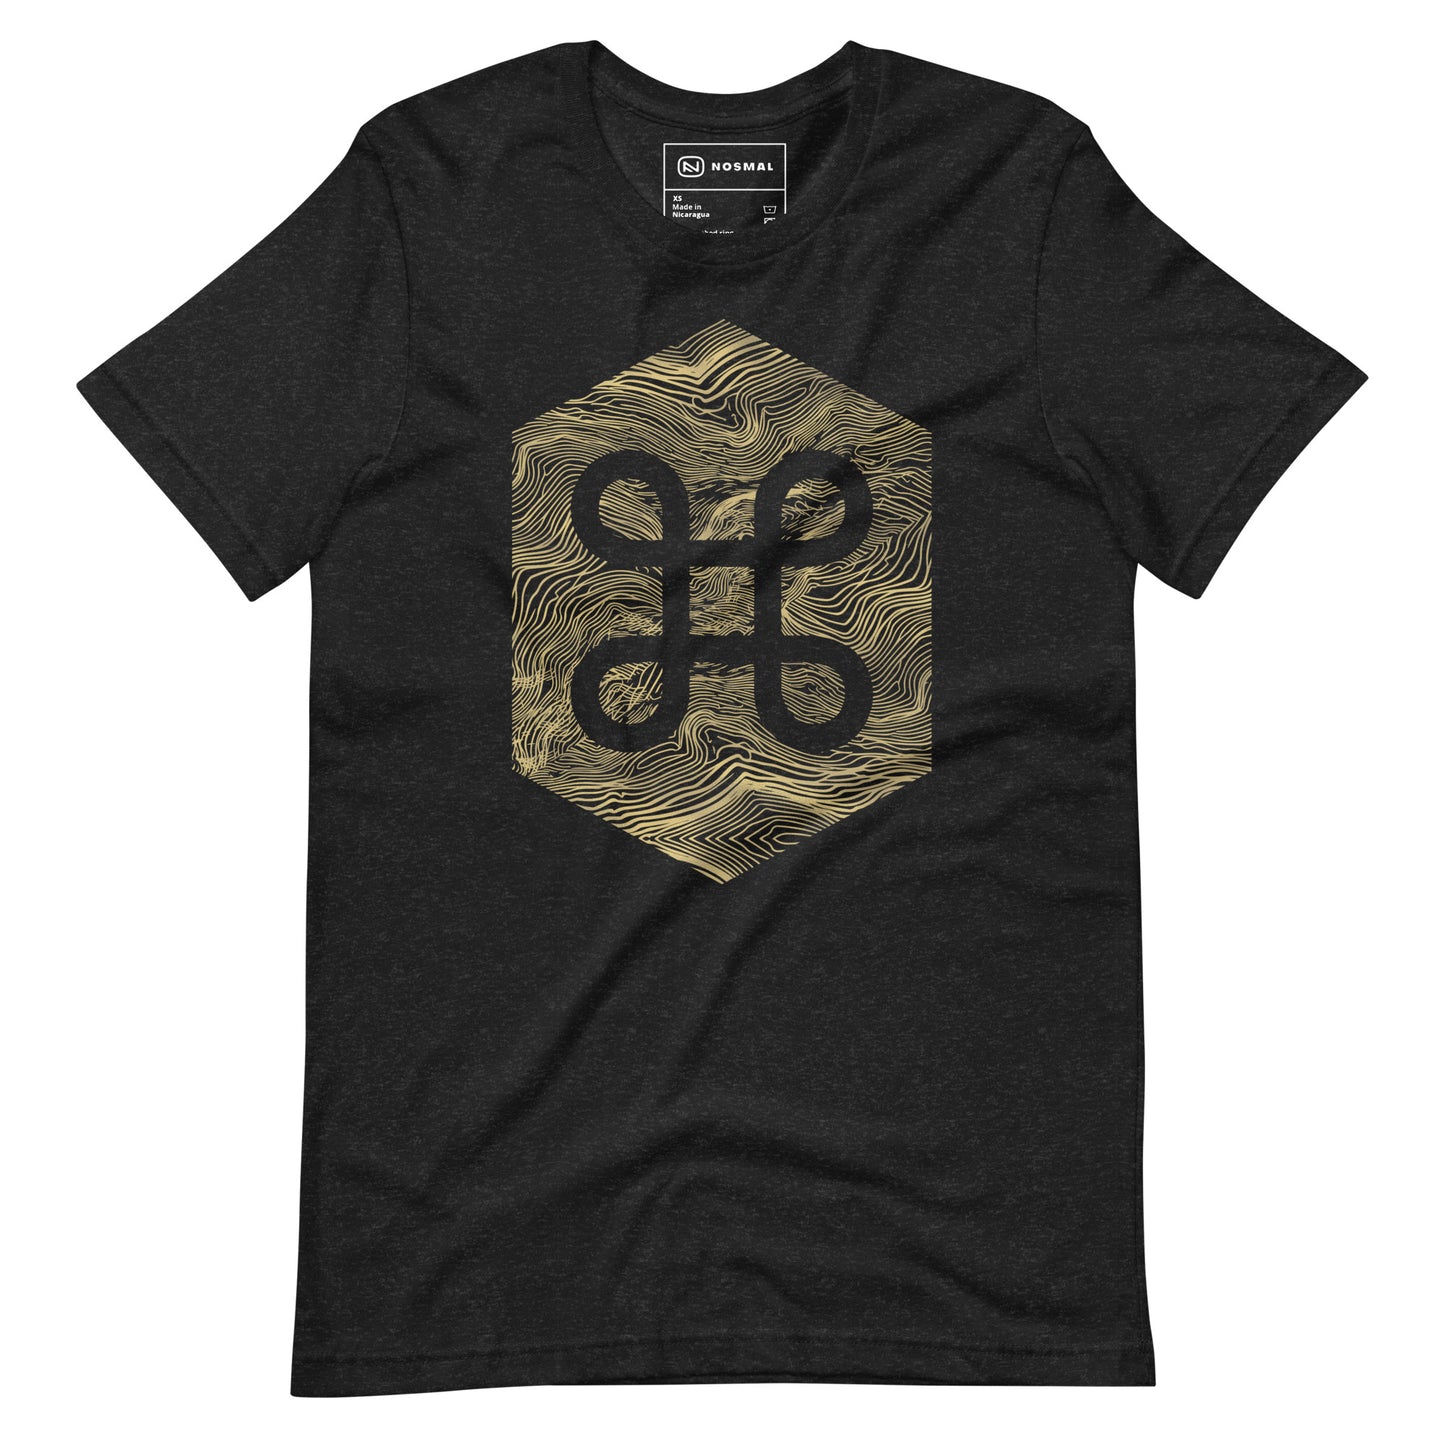 Straight on view of the commander gold design on heather black unisex t-shirt.